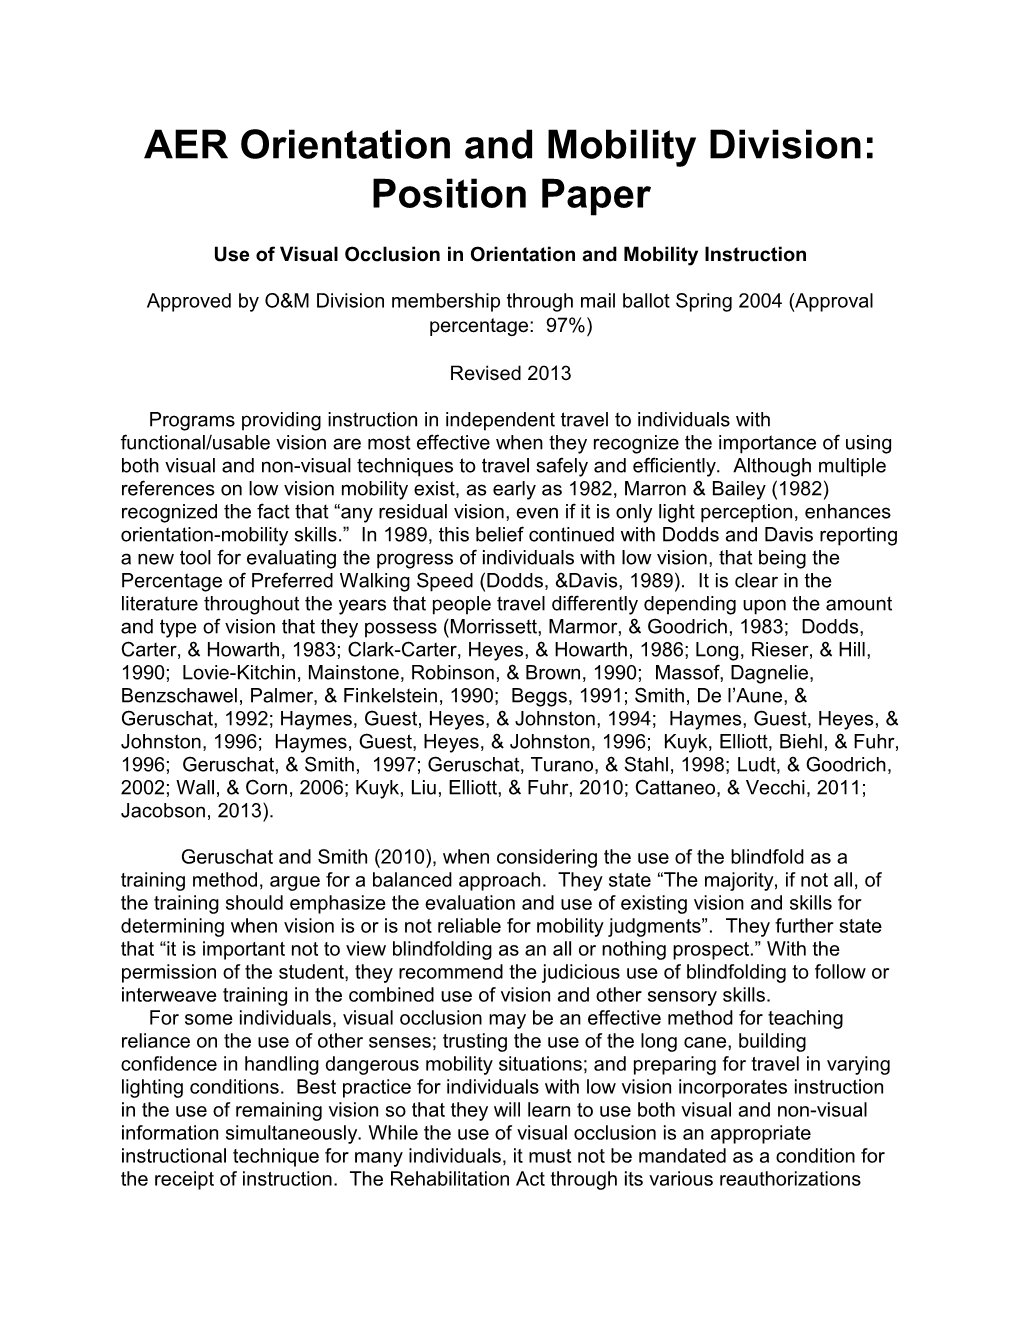 AER Orientation and Mobility Division: Position Paper